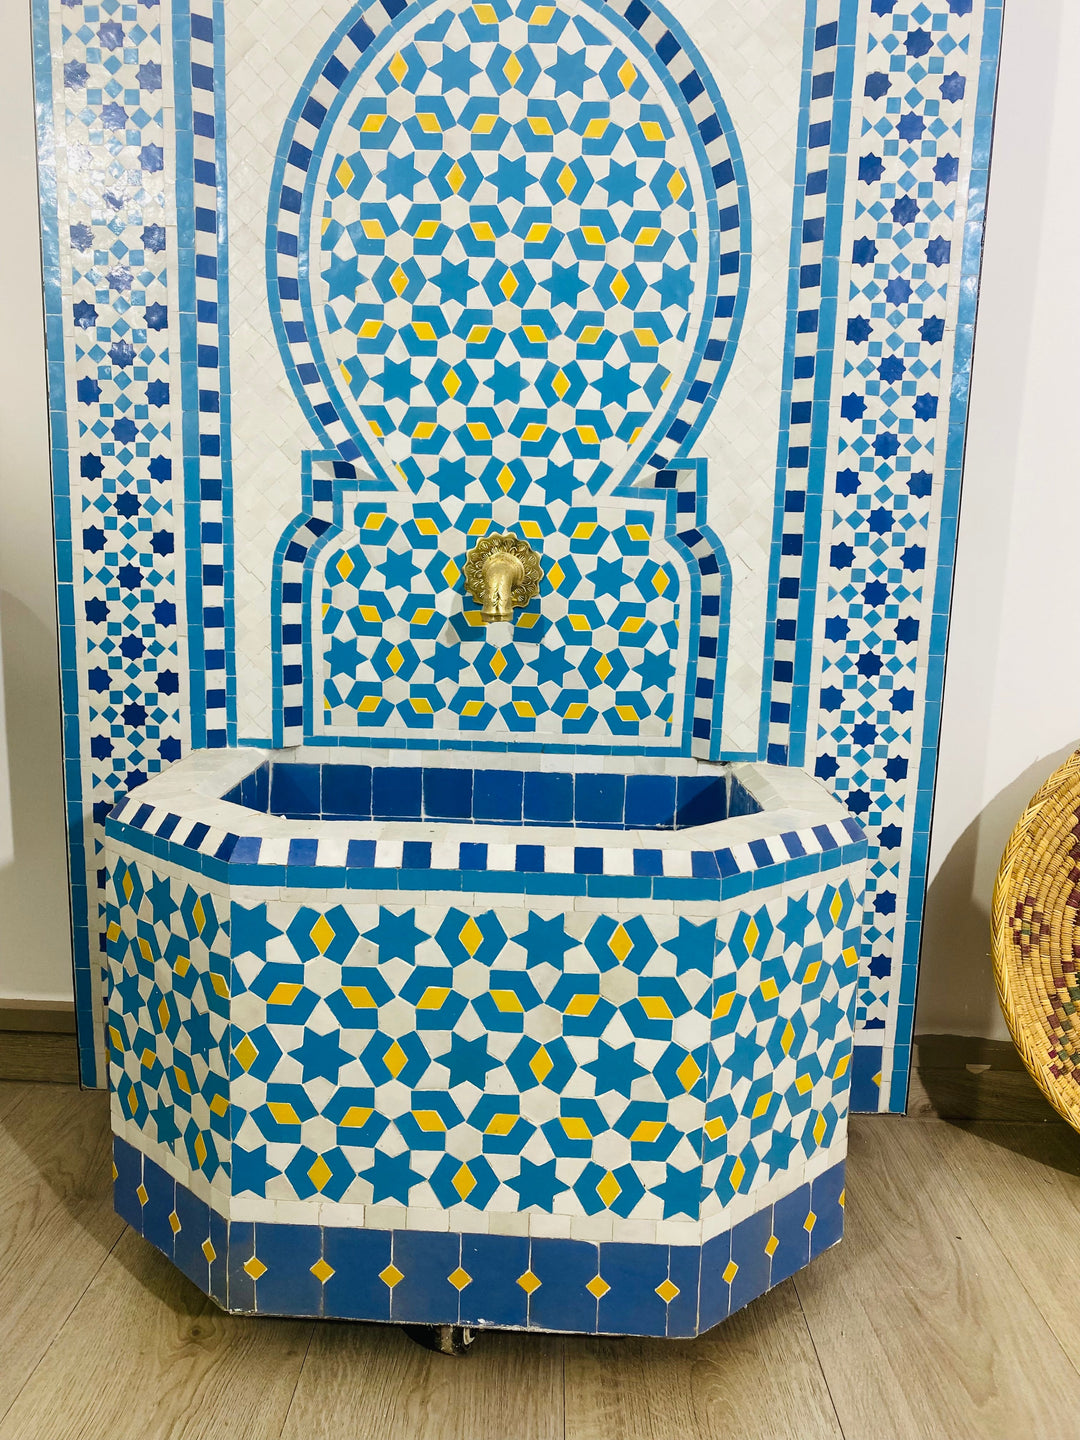 Marrakech Mosaic water feature - Zellige Mosaic water Fountain - Mosaic Fountain 100% handcrafted for indoor/outdoor - mid century modern